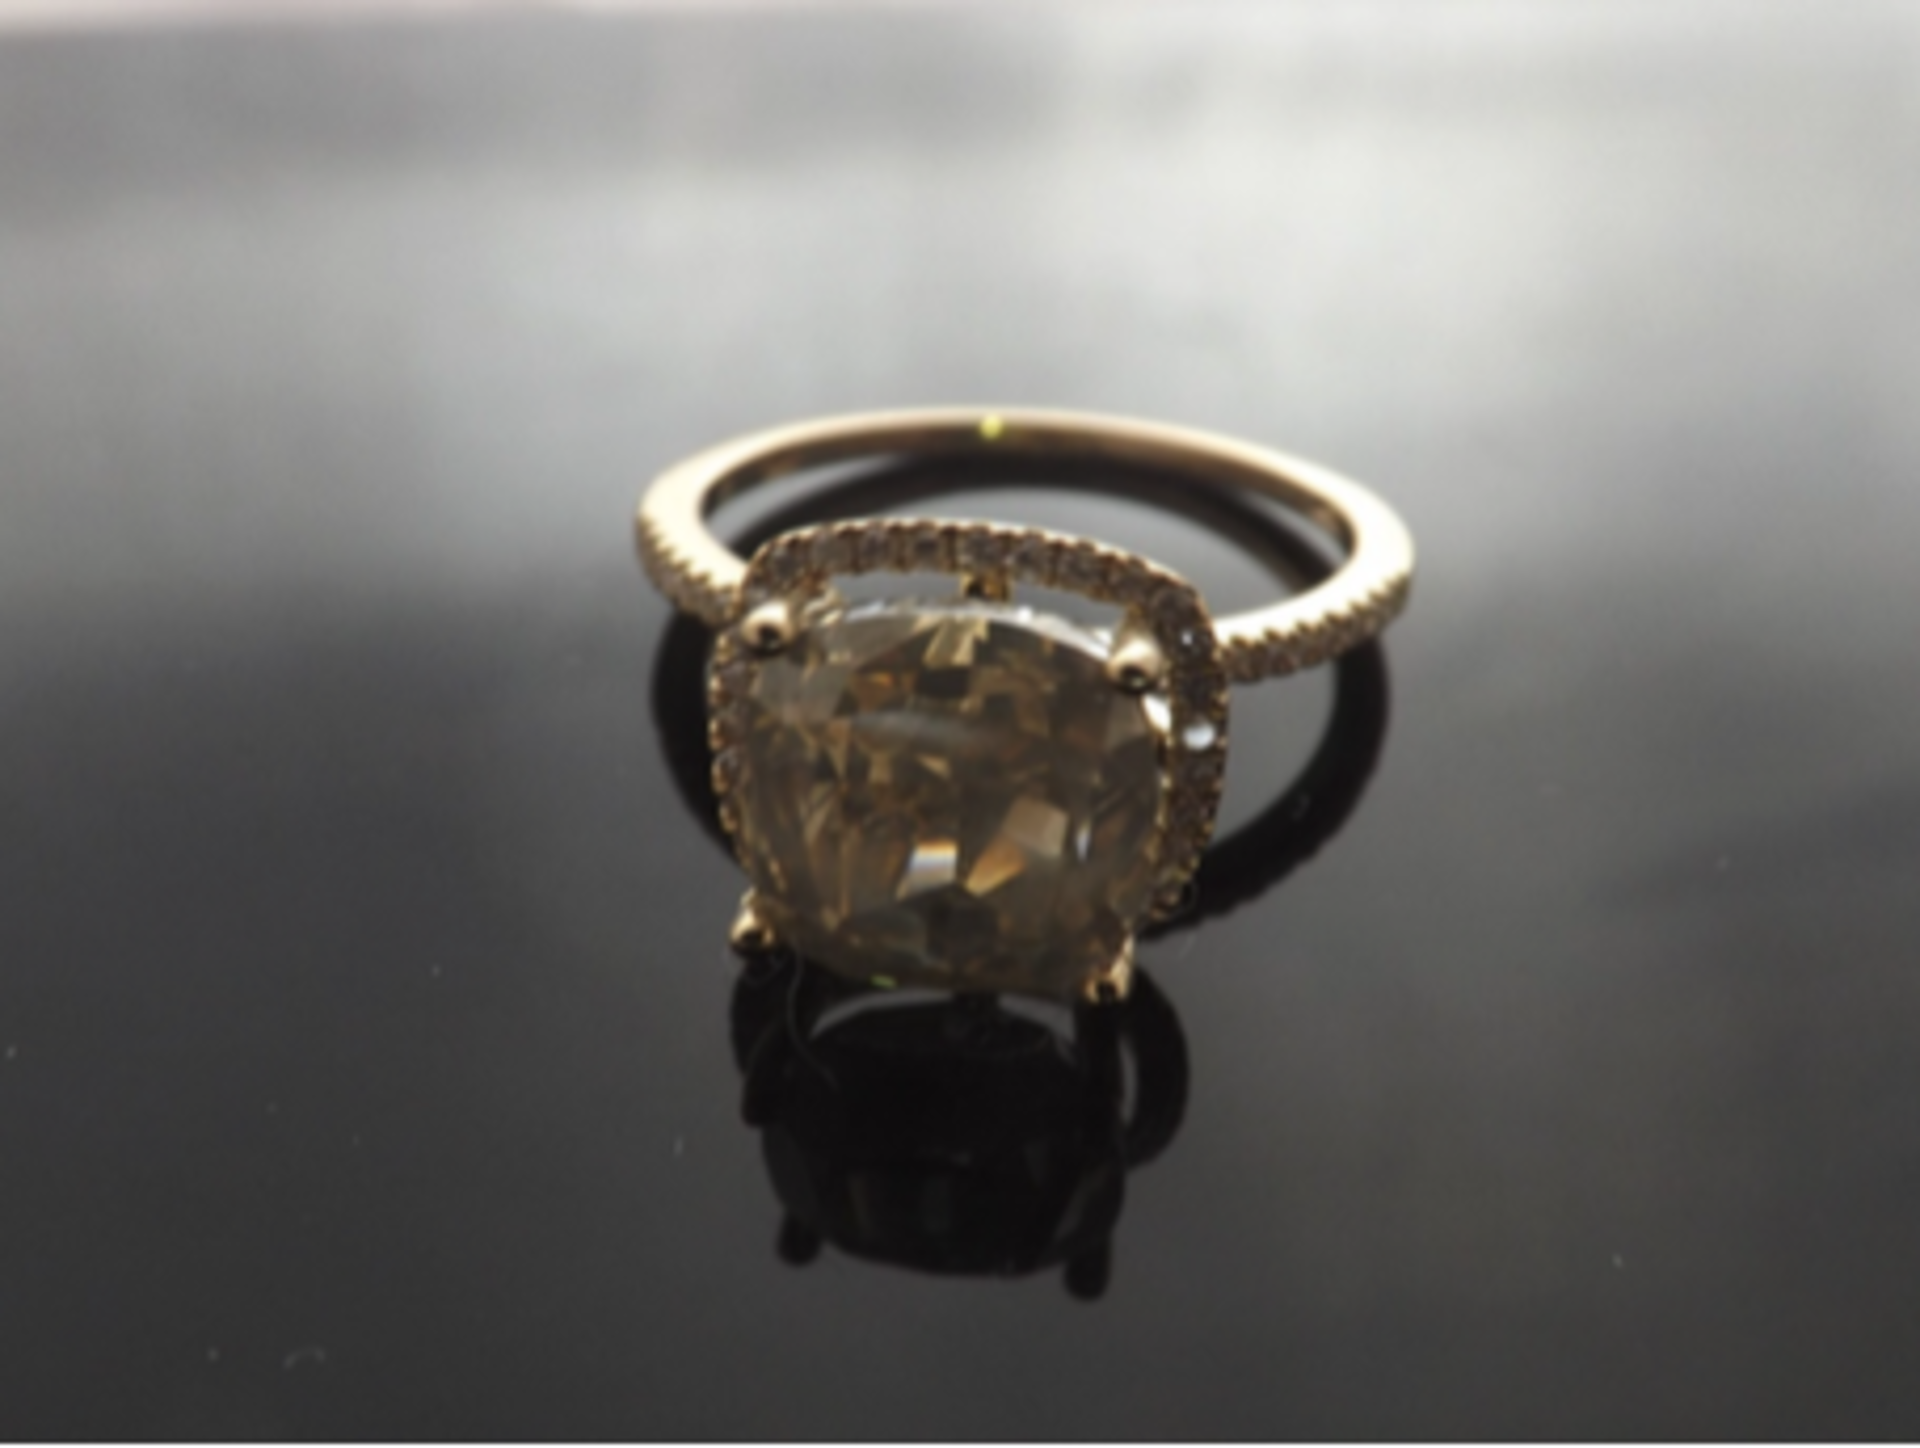 4.5ct Brilliant Cut Diamond Ring set in a 10k Yellow Gold Band.